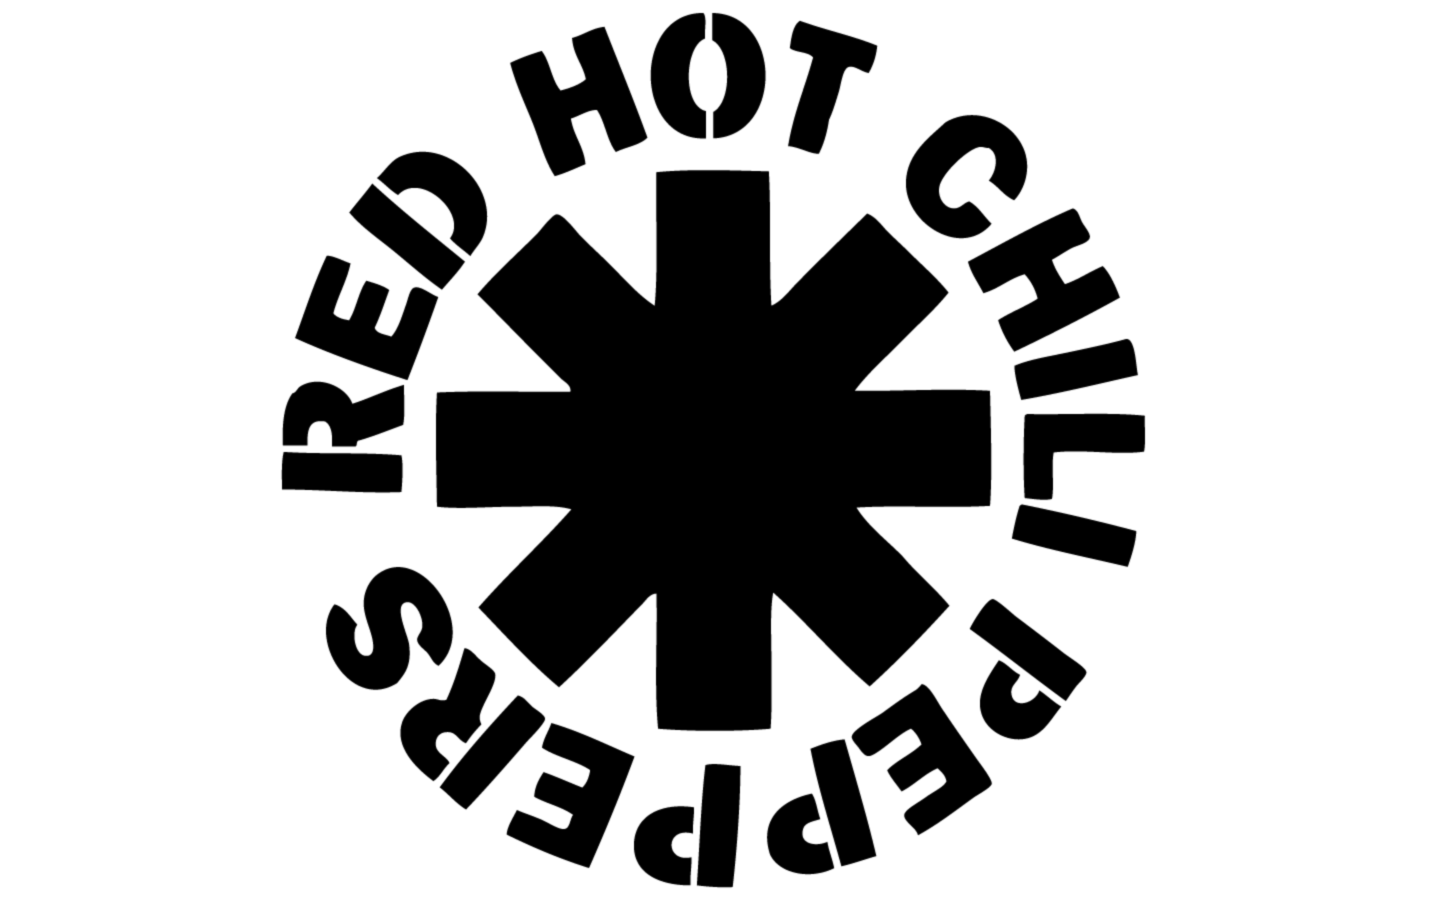 Red and Black Band Logo - Red Hot Chili Peppers #logo | Red Hot Chili Peppers | Chili, Music, Hot